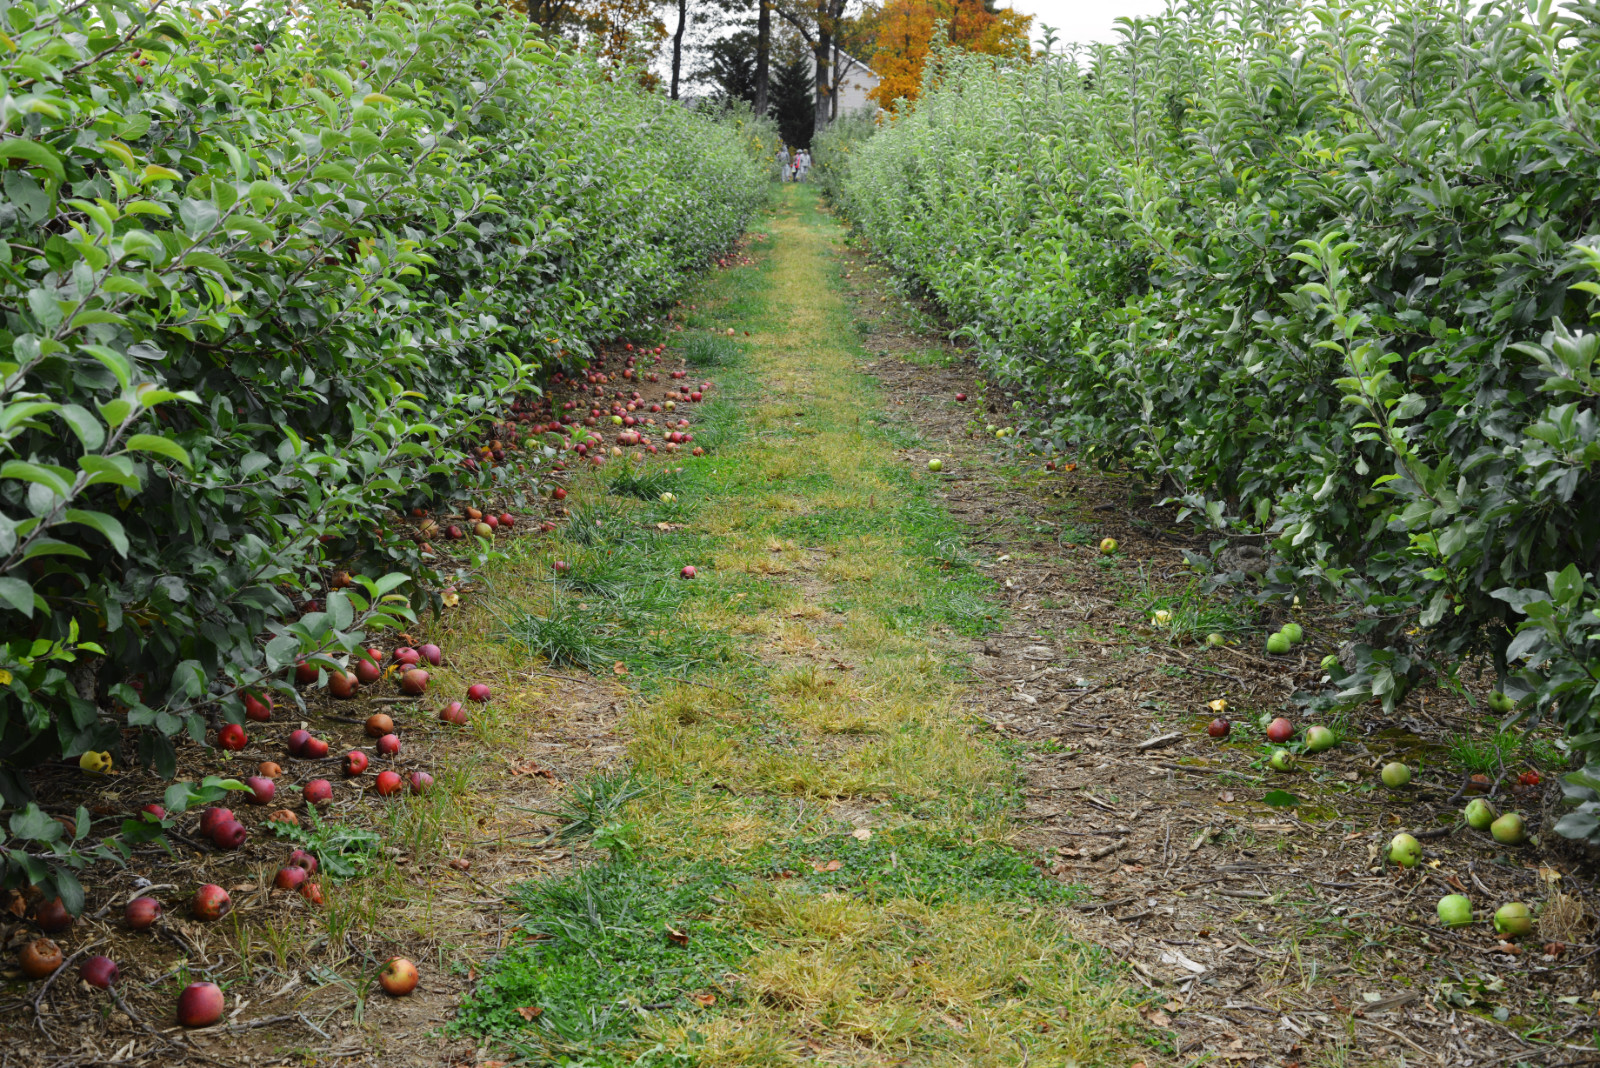 Aisle between apple trees in an orchard